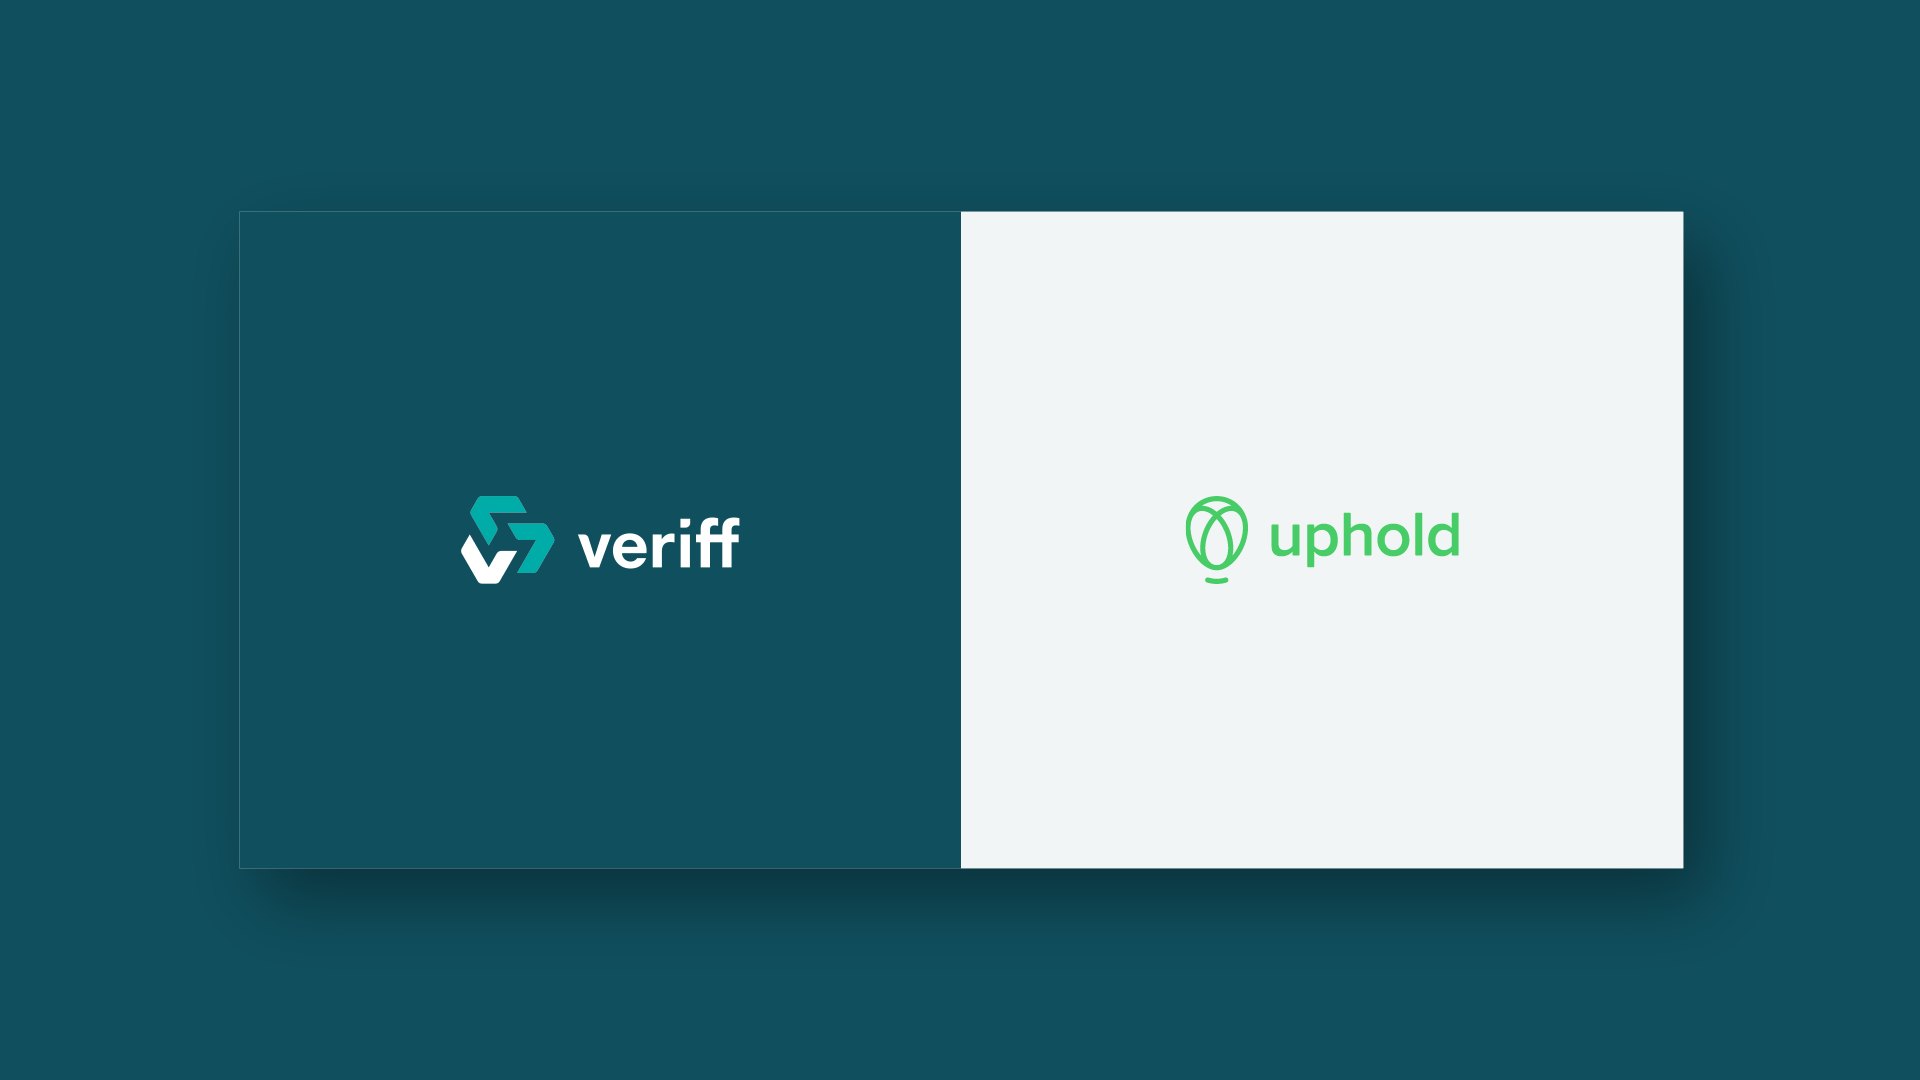 Veriff and Uphold